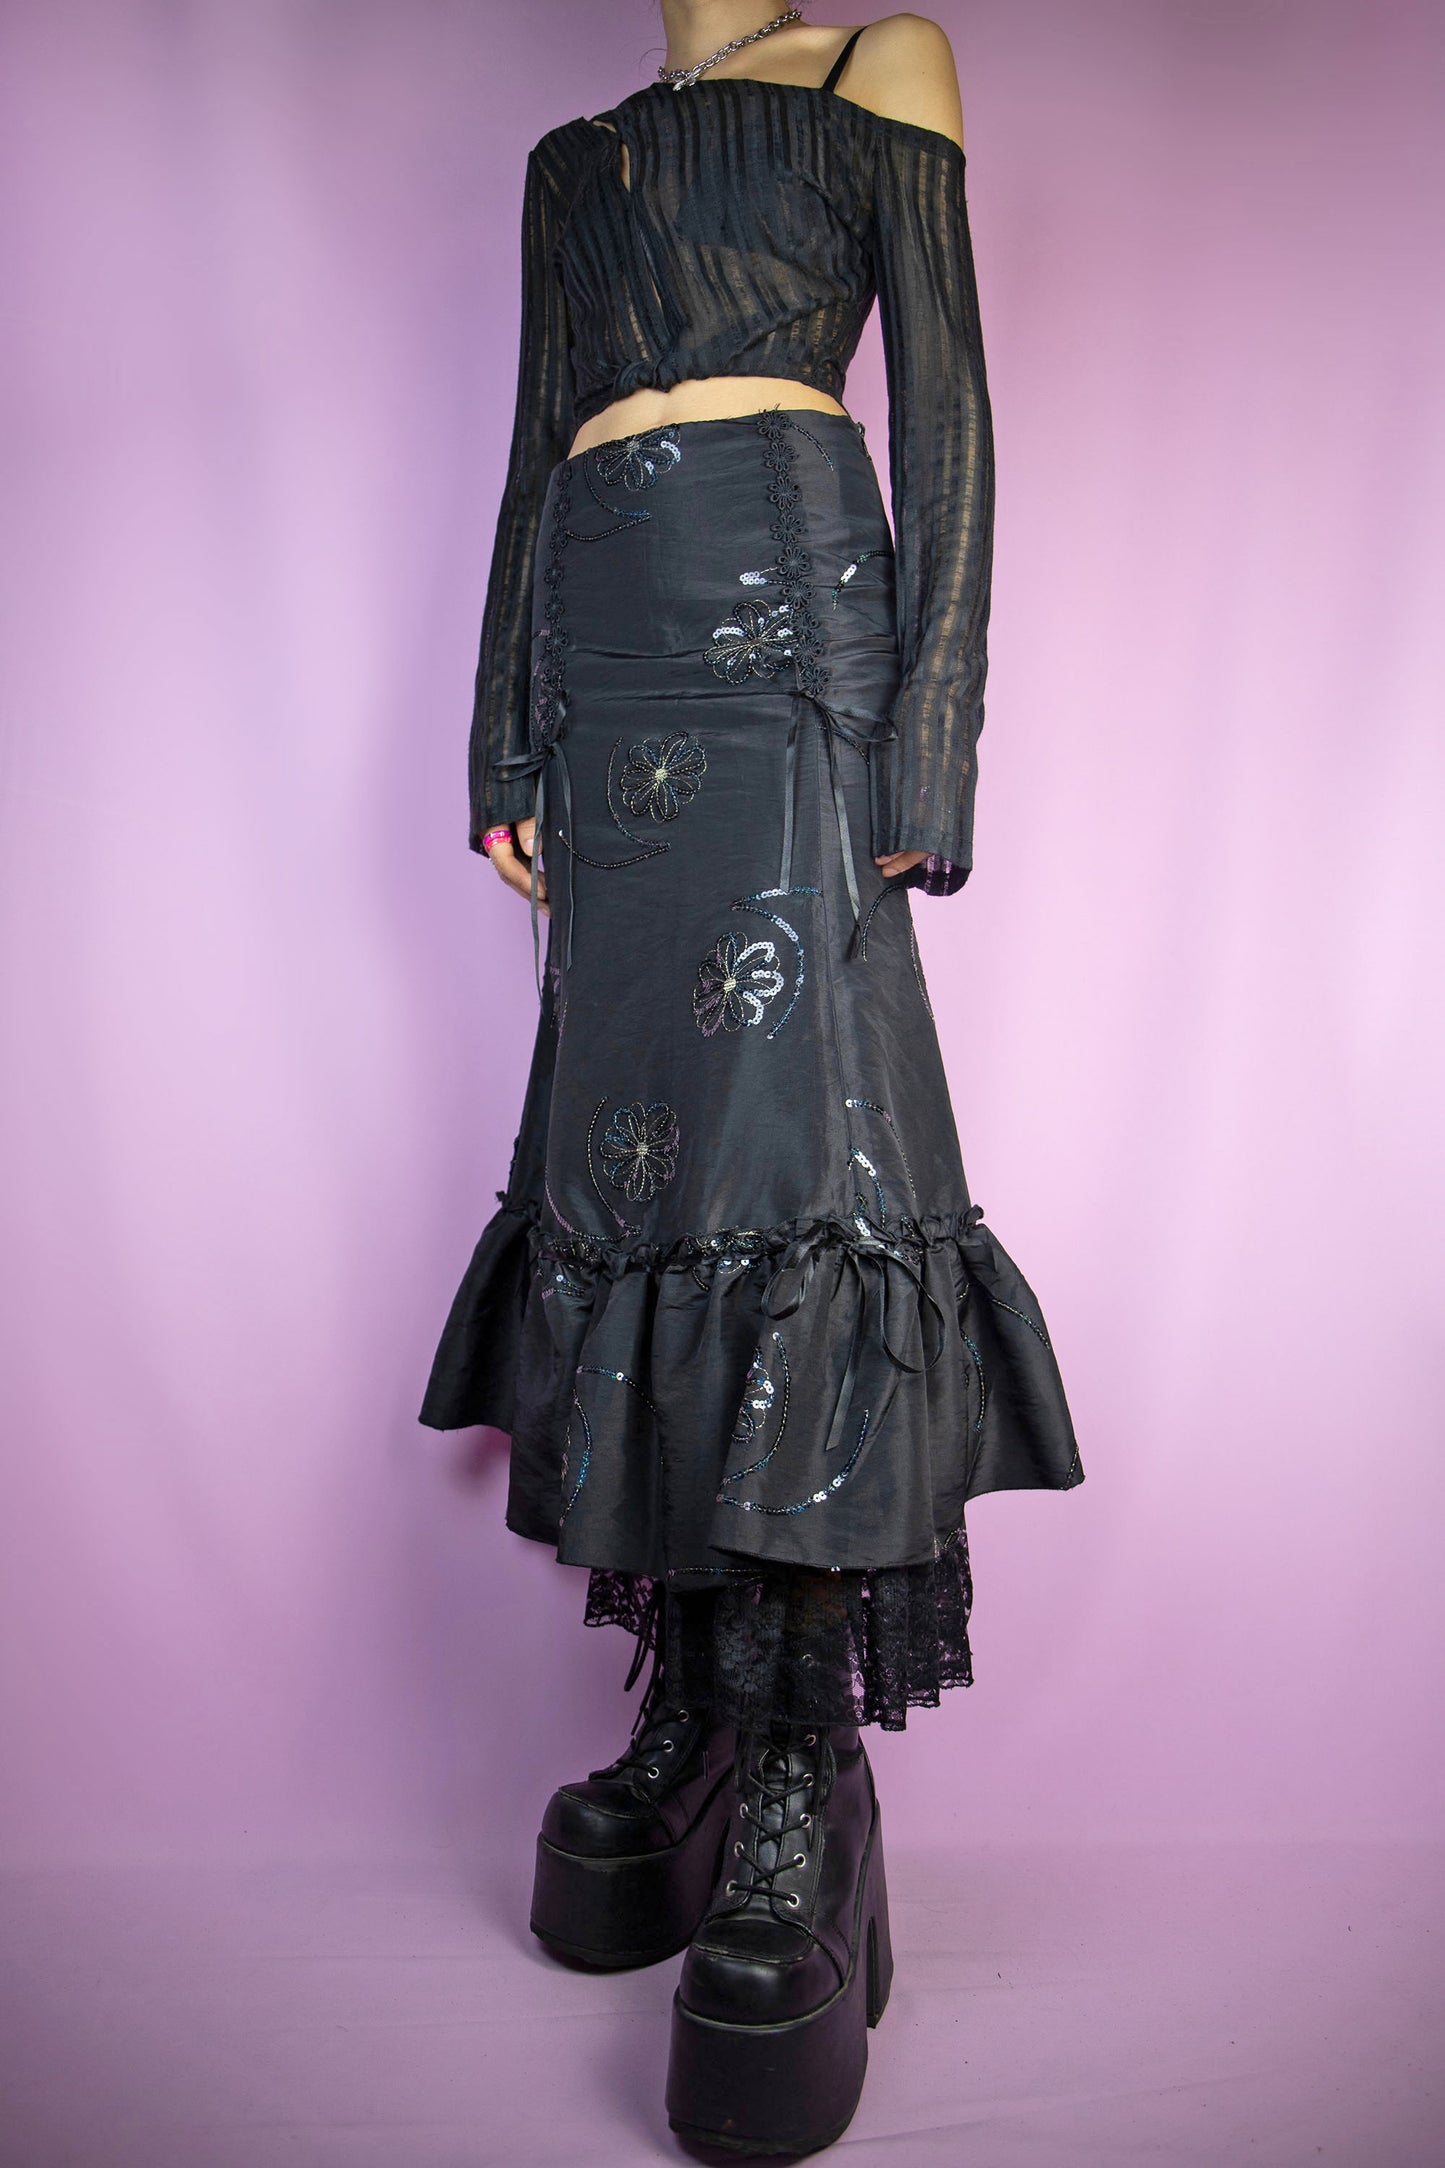 The Vintage 90's Black Ruffle Maxi Skirt is an enchanting long black skirt adorned with sequin details, bows, a delightful ruffled hem, and a side zipper closure. This stunning fairy goth maxi skirt captures the essence of 1990s style.